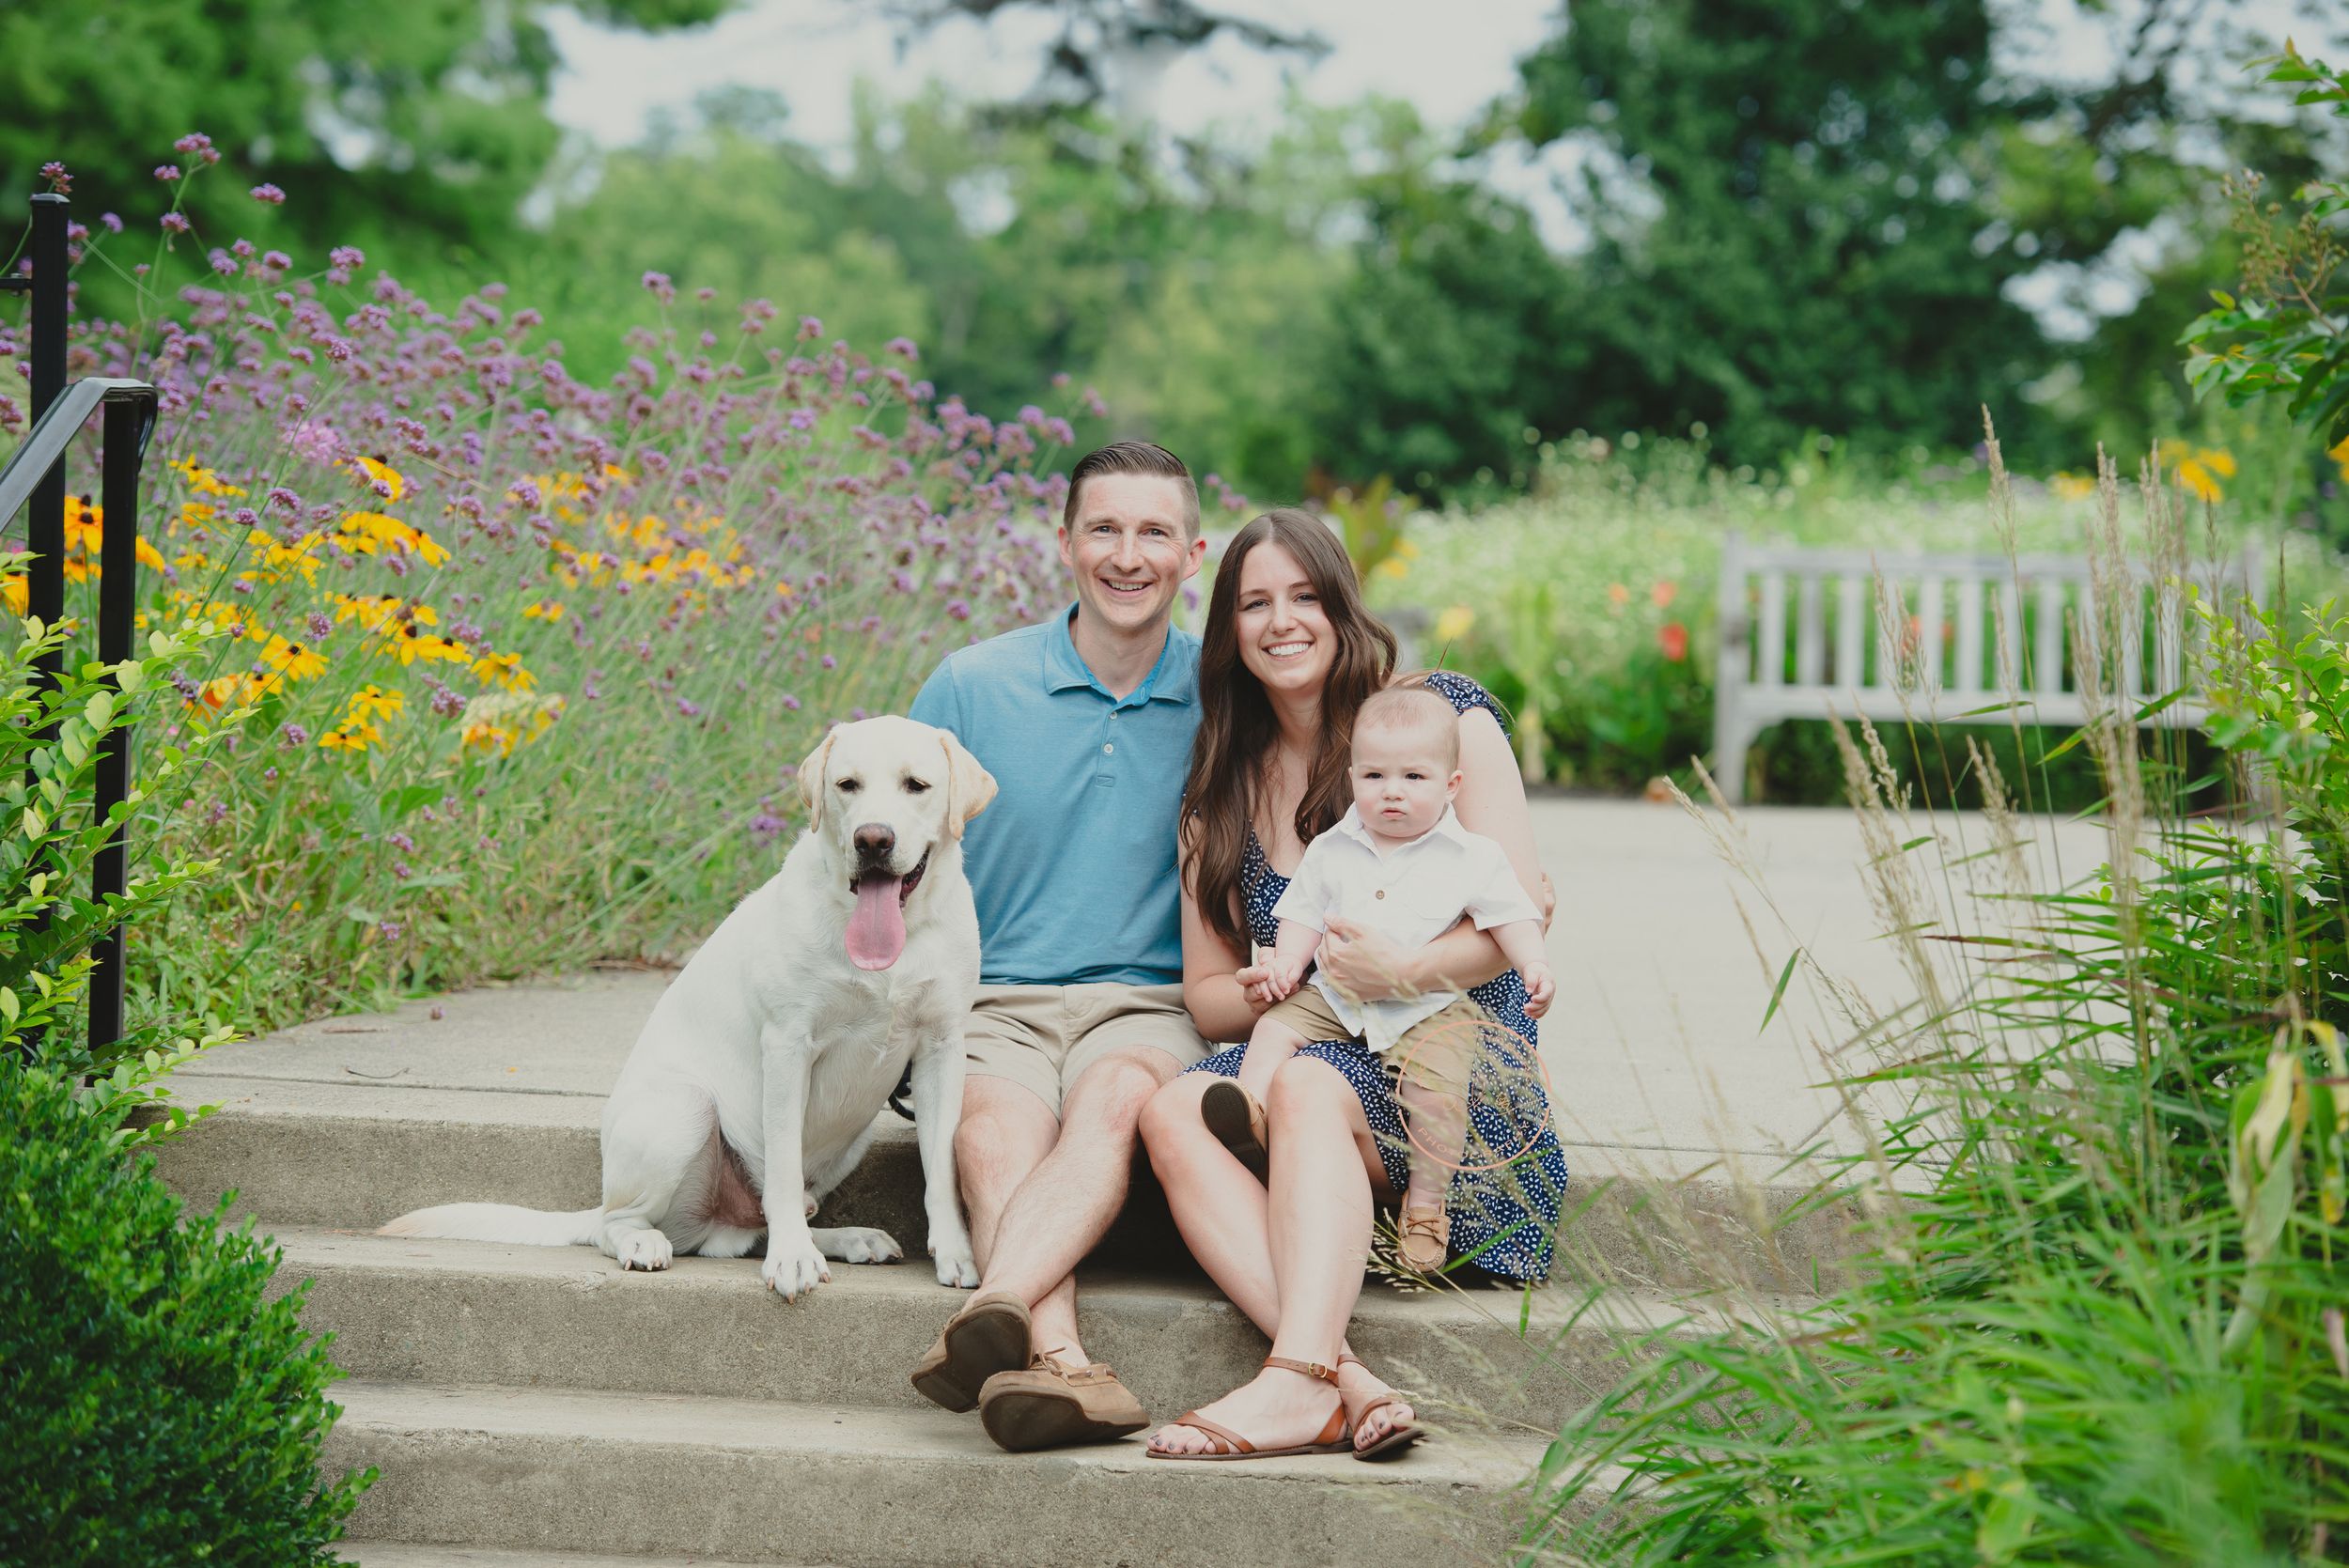 A family portrait on outdoor steps featuring a man, a woman holding a baby, and a dog surrounded by greenery and flowers.